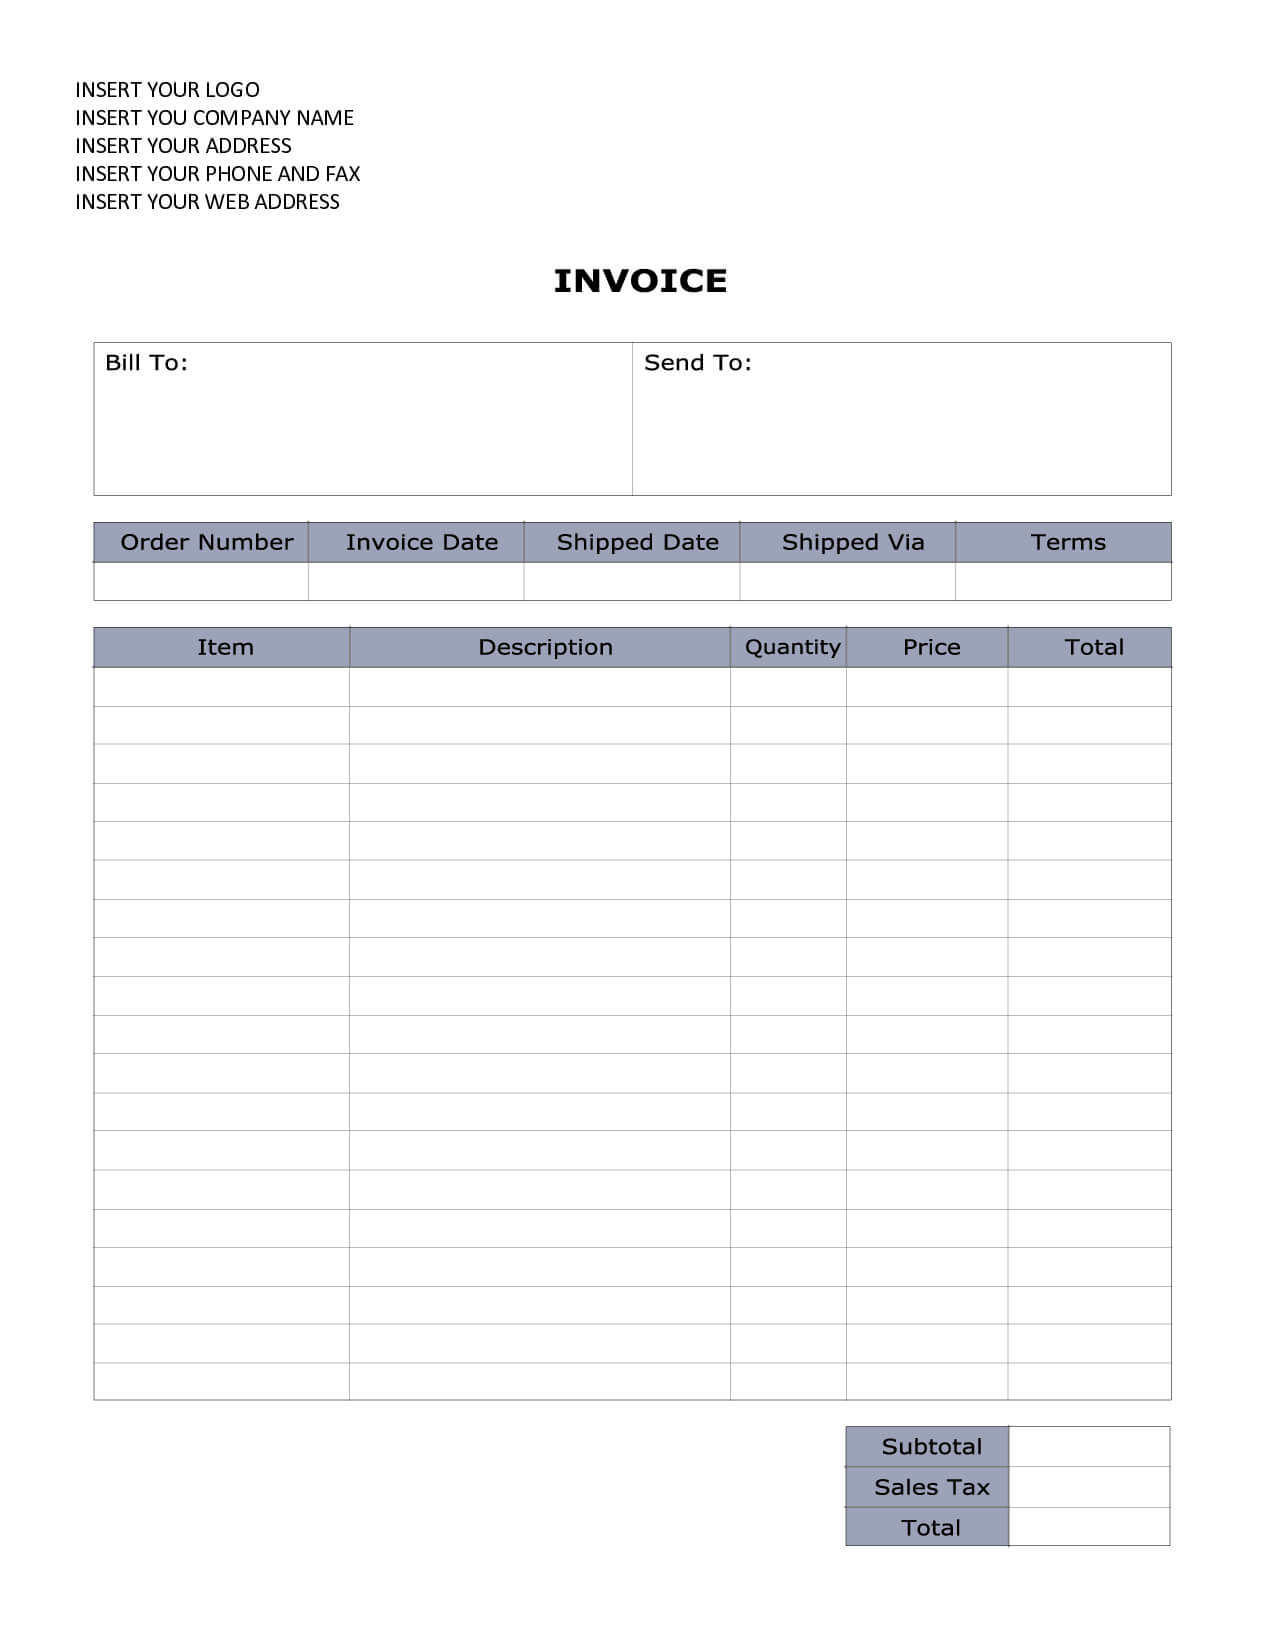 Invoice Template Word 2010 | Invoice Example Inside Invoice Template Word 2010